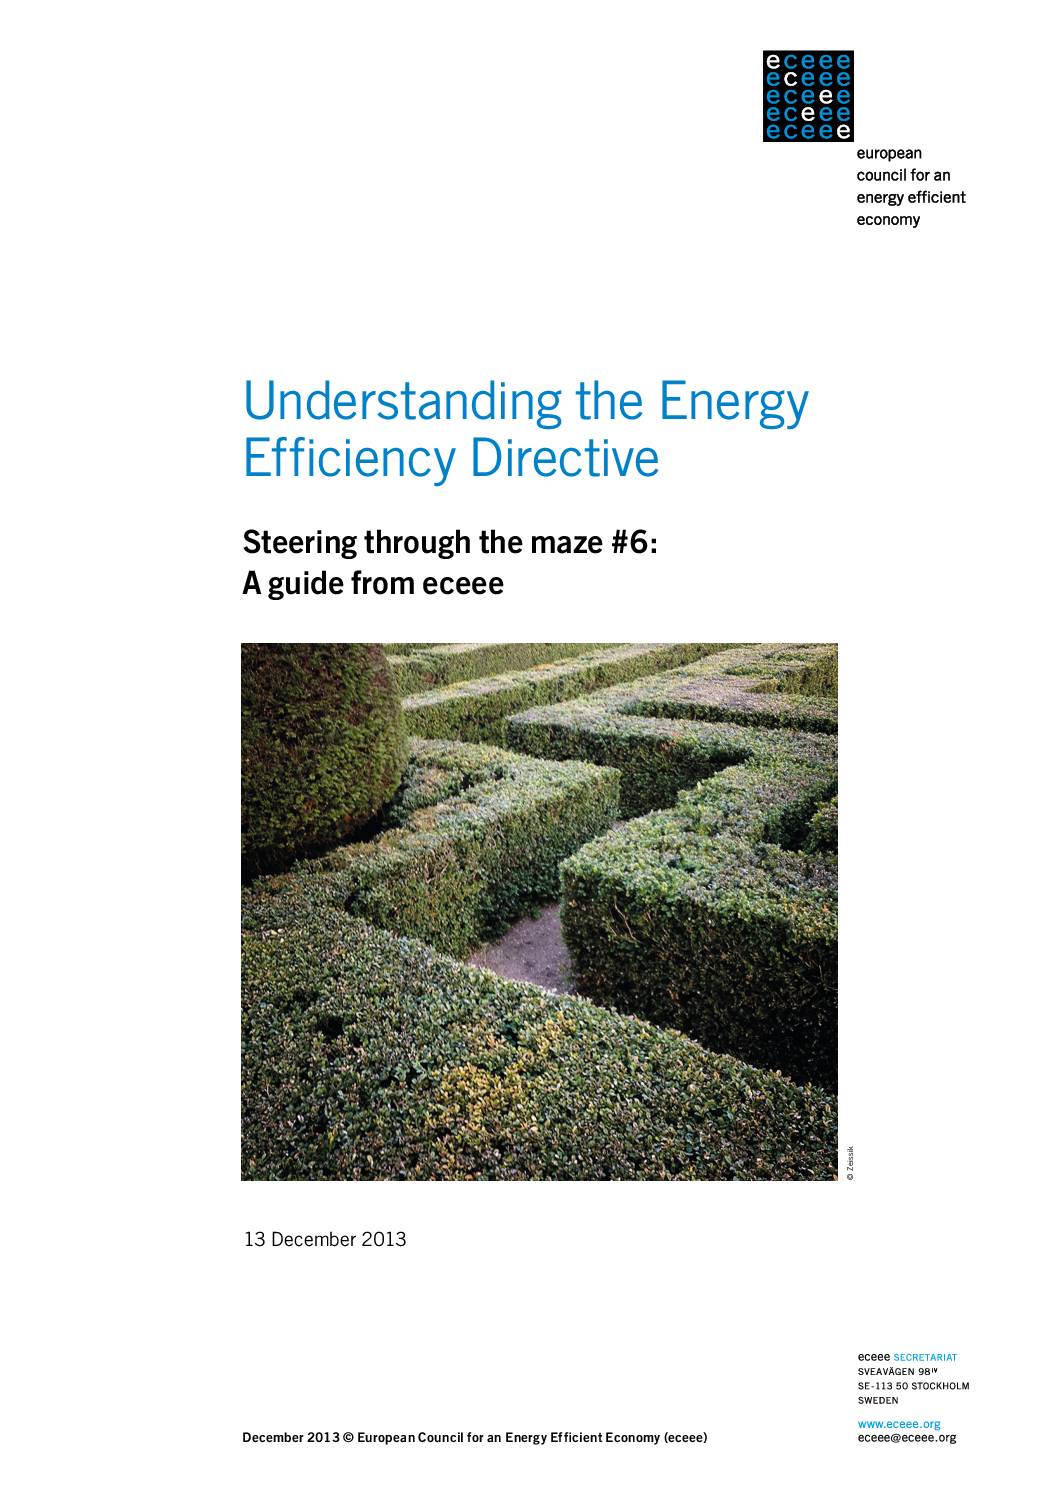 Understanding the Energy Efficiency Directive: Steering through the maze #6: A guide from eceee